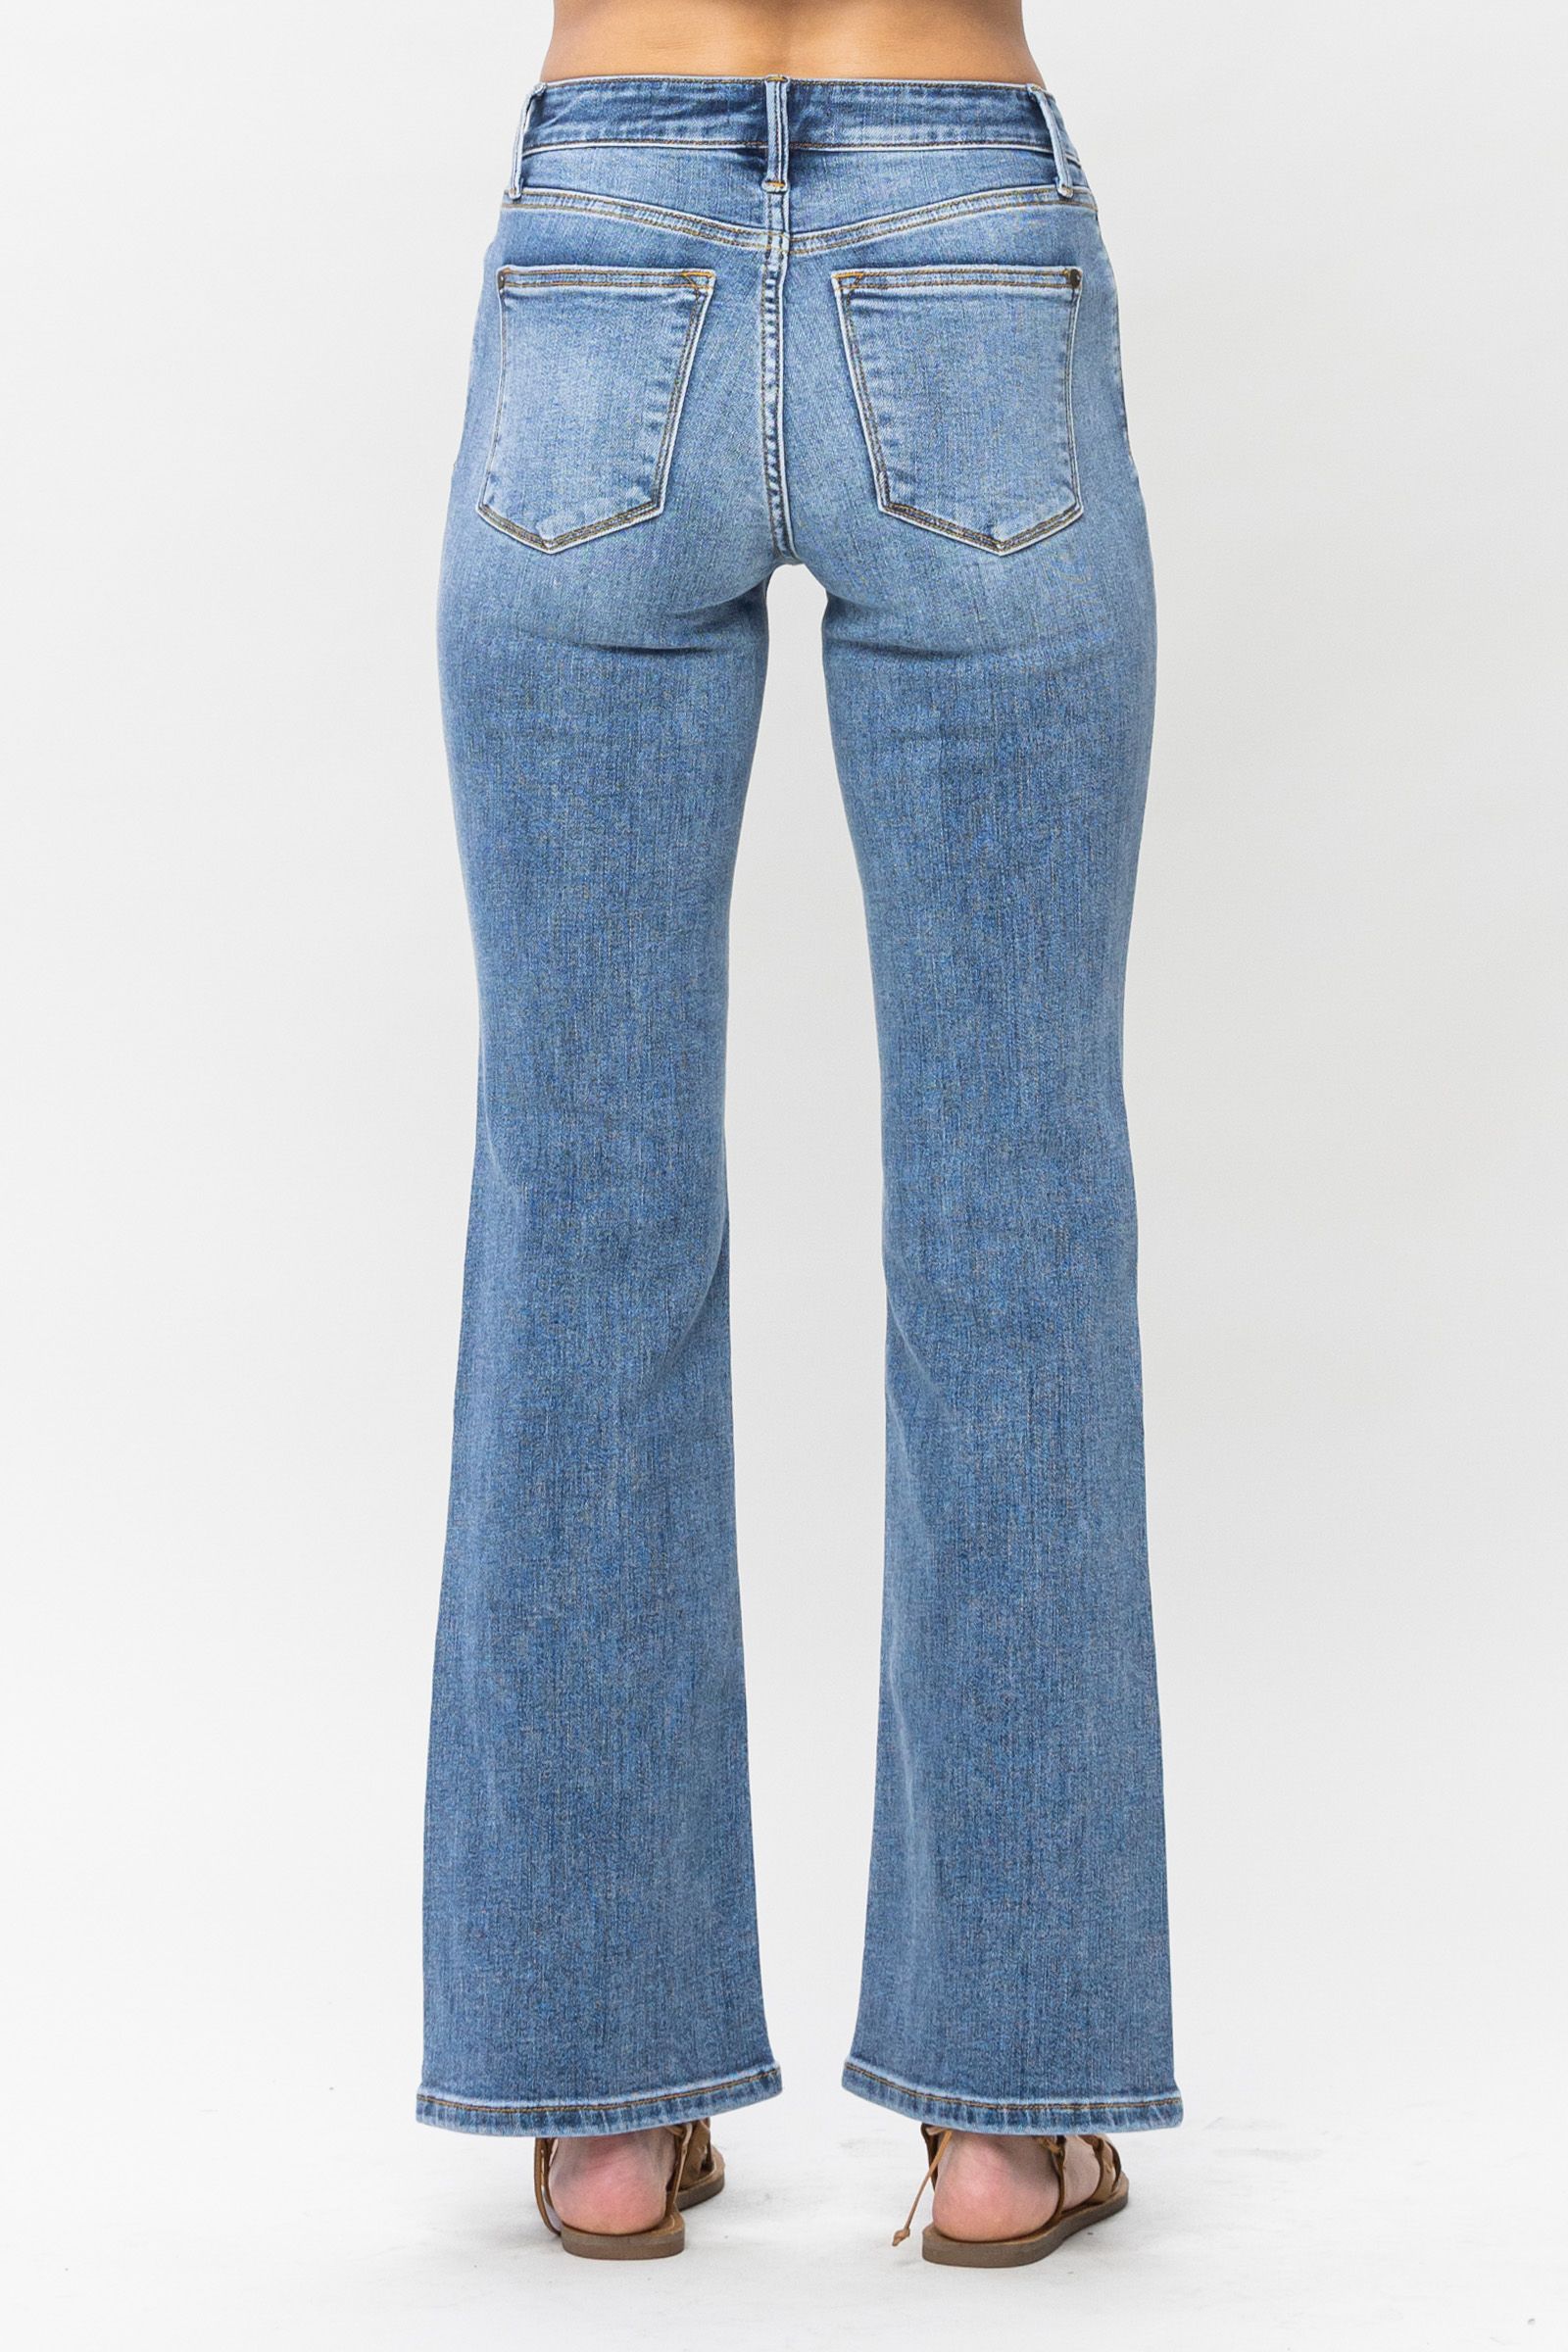 MID RISE VINTAGE BUTTON FLY BOOTCUT